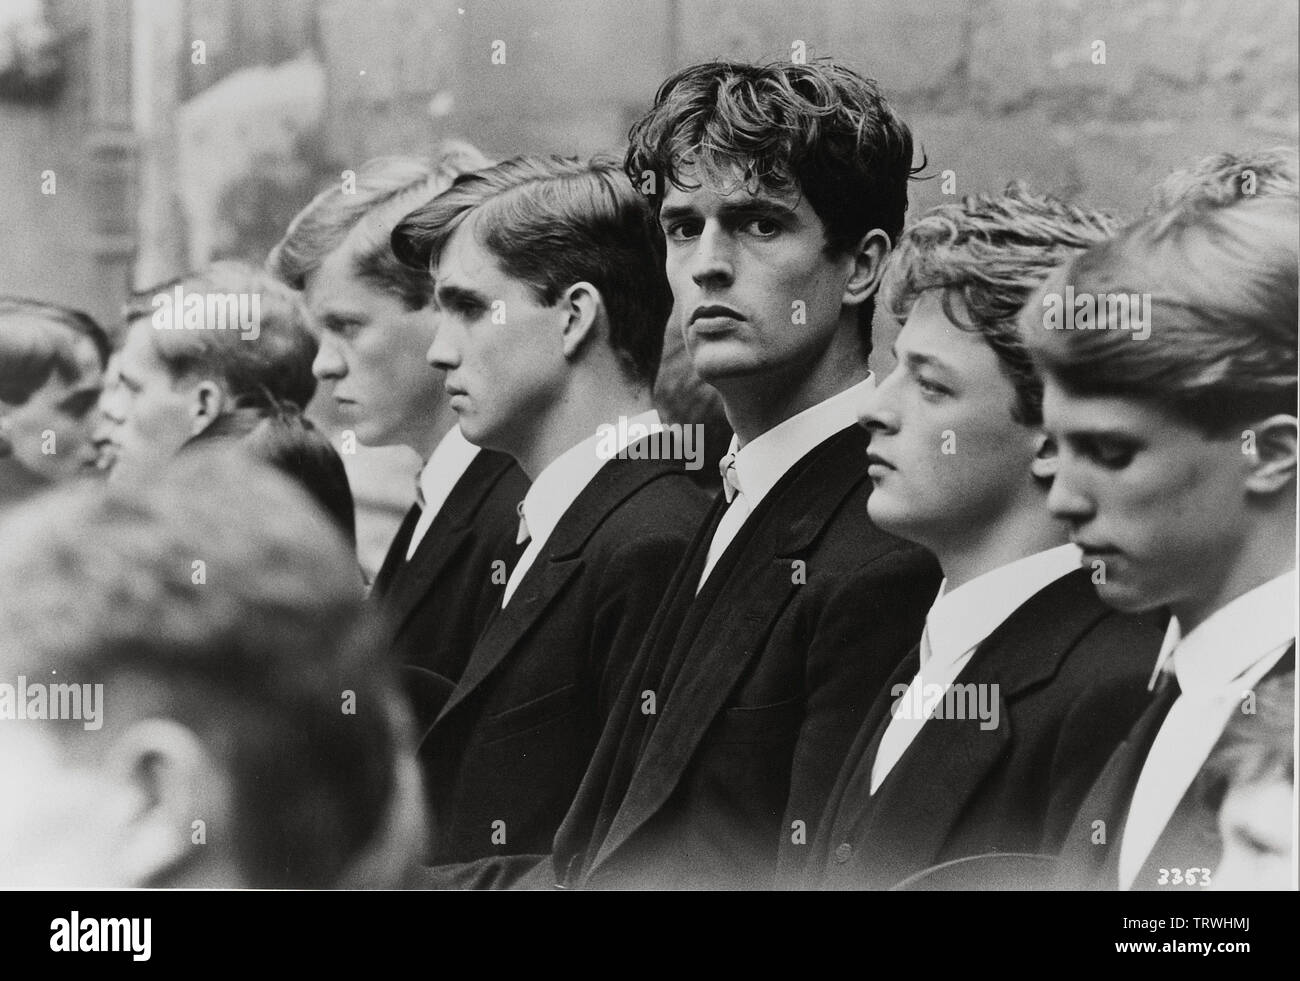 RUPERT EVERETT in ANOTHER COUNTRY (1984). Copyright: Editorial use only. No merchandising or book covers. This is a publicly distributed handout. Access rights only, no license of copyright provided. Only to be reproduced in conjunction with promotion of this film. Credit: COLUMBIA PICTURES / Album Stock Photo